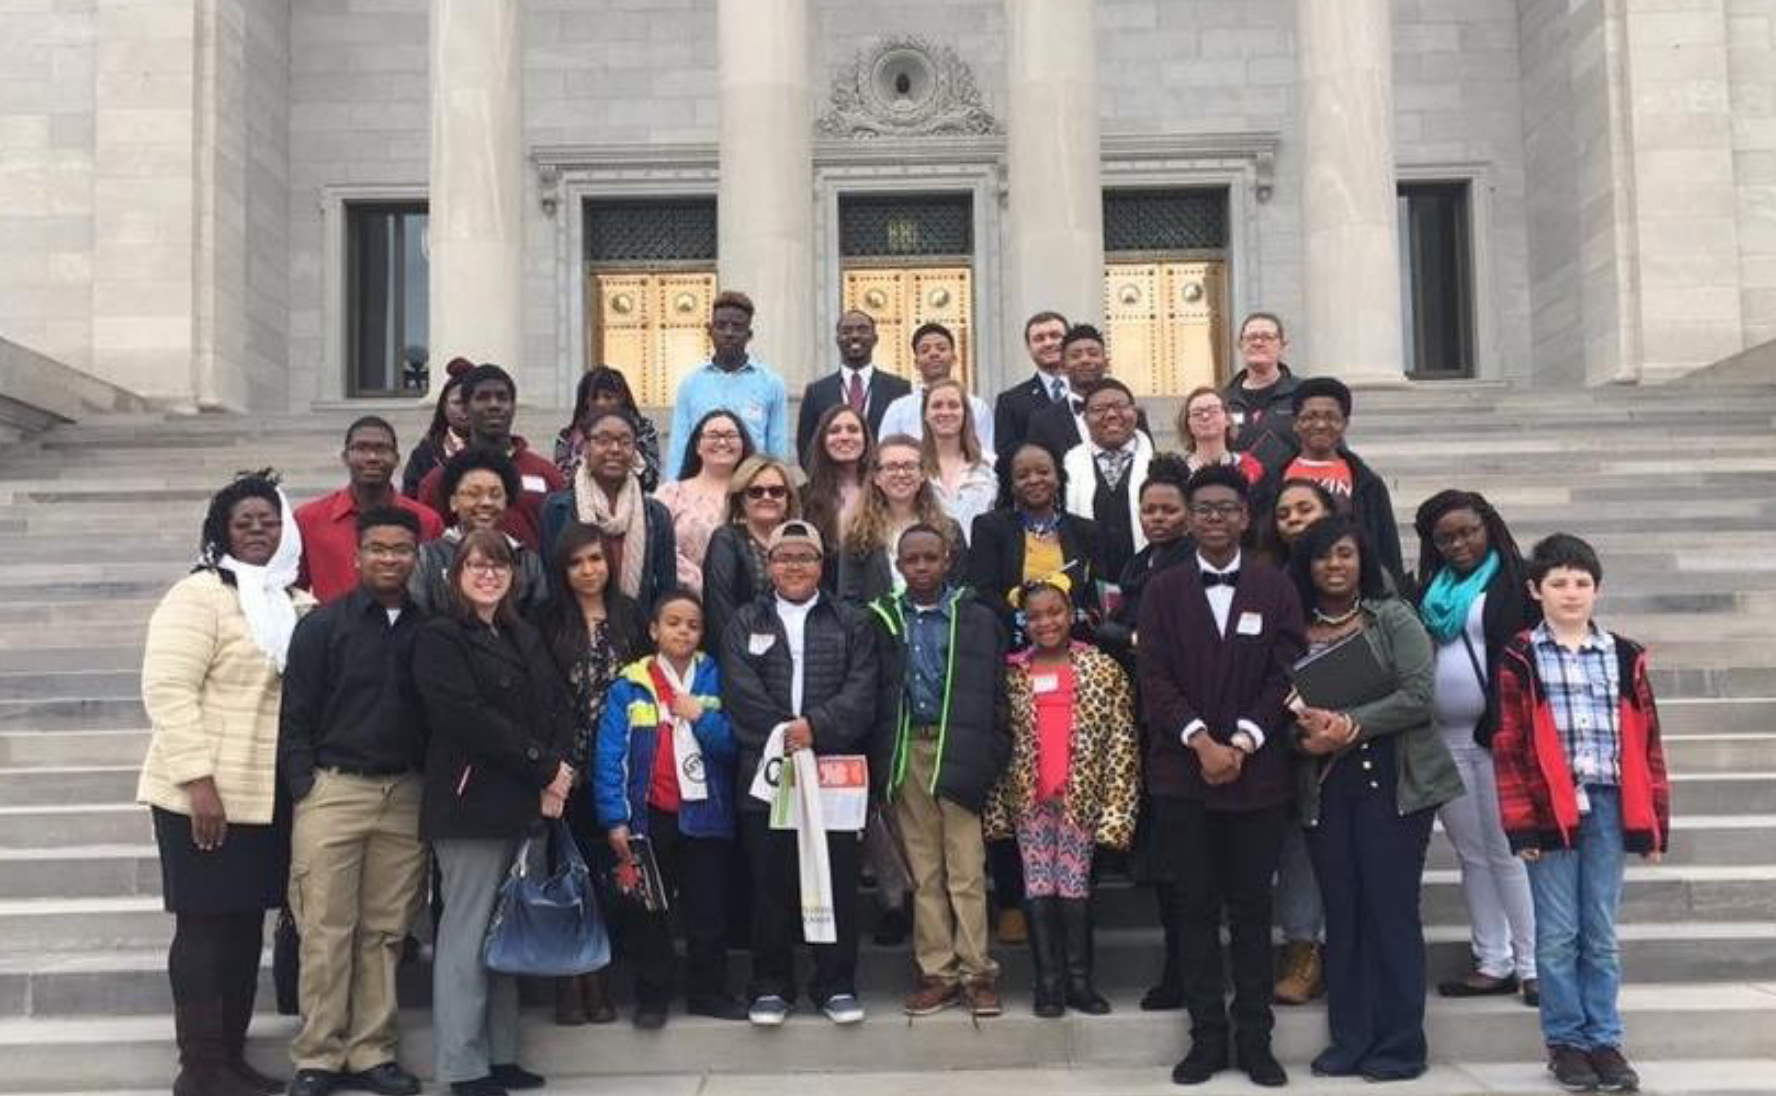 RCA youth from Earle, Marianna, Rose Bud, Dermott, Hughes, Paron, Deer, Mt. Judea, and Valley Springs participate in Youth Day at the Capitol.